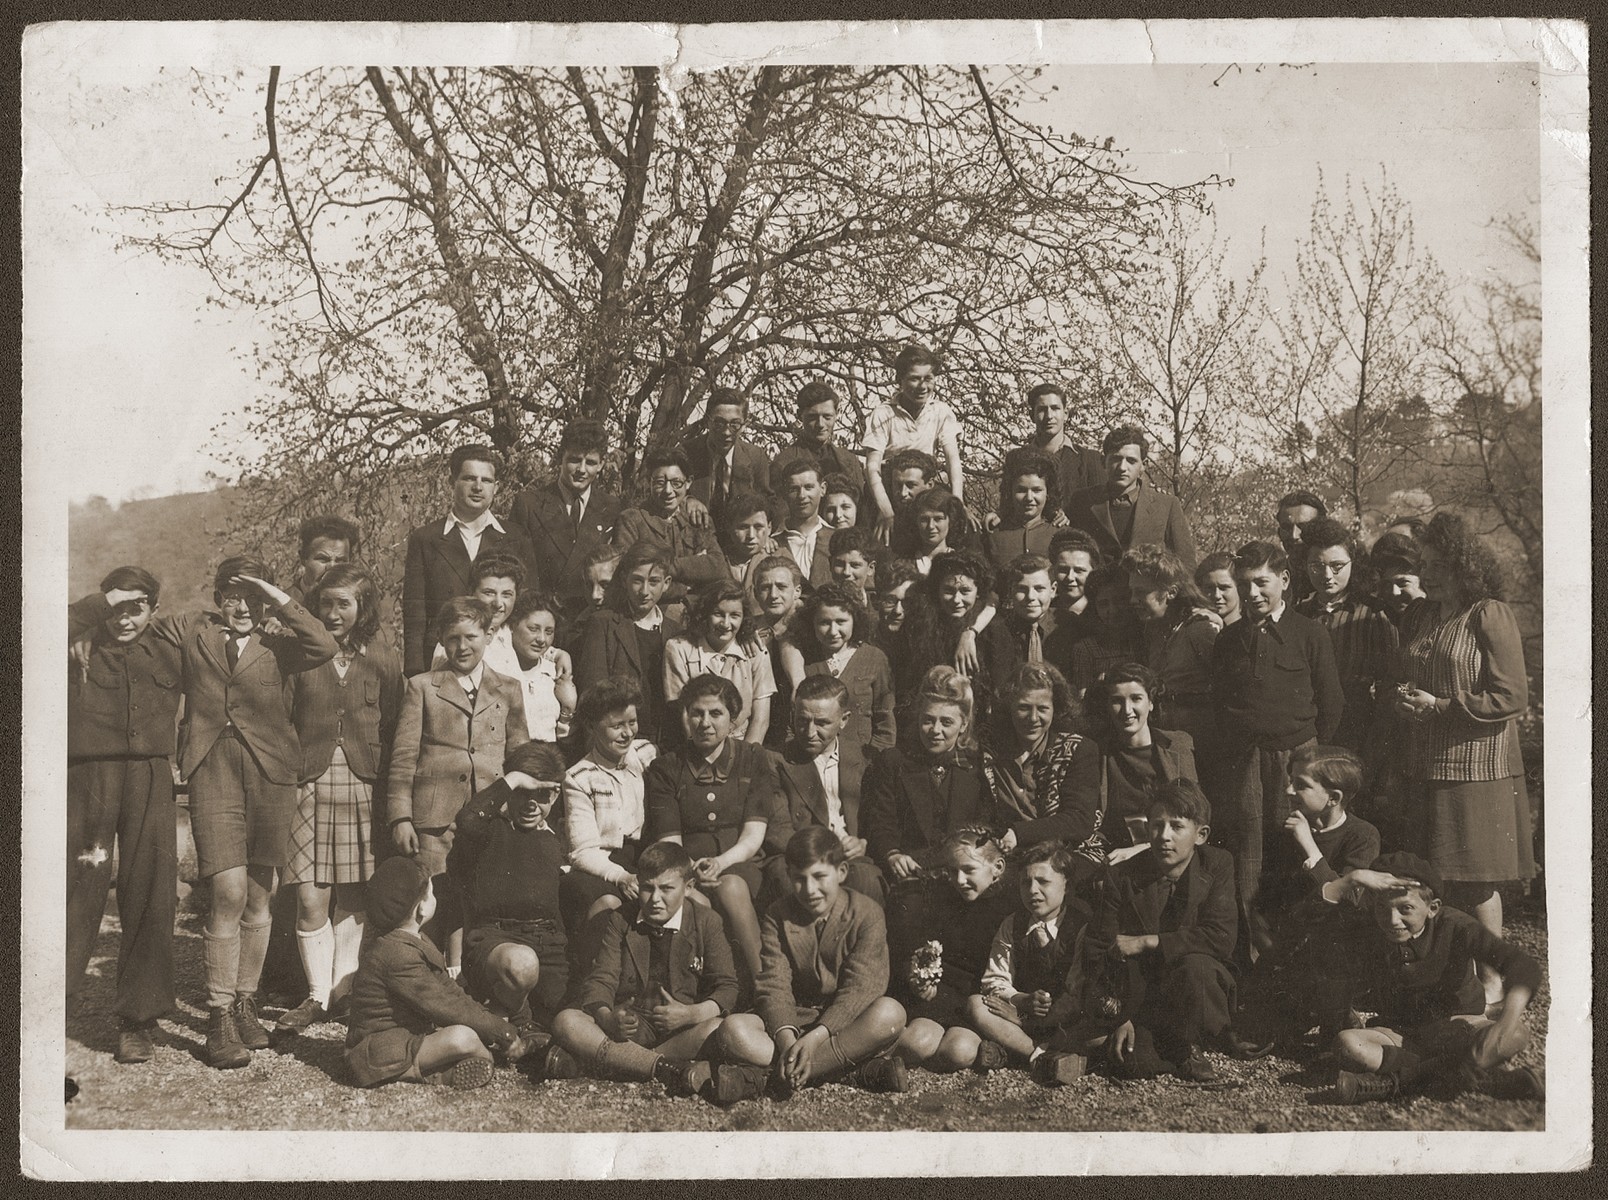 Group portrait of Jewish youth and staff from the OSE children's homes at Collognes and Le Tremplin.
  
Among those pictured are the directors of the Collonges home, Mr. and Mrs. Hannau (second row, center) and Yvonne Rocque, director of Le Tremplin (second from the right).